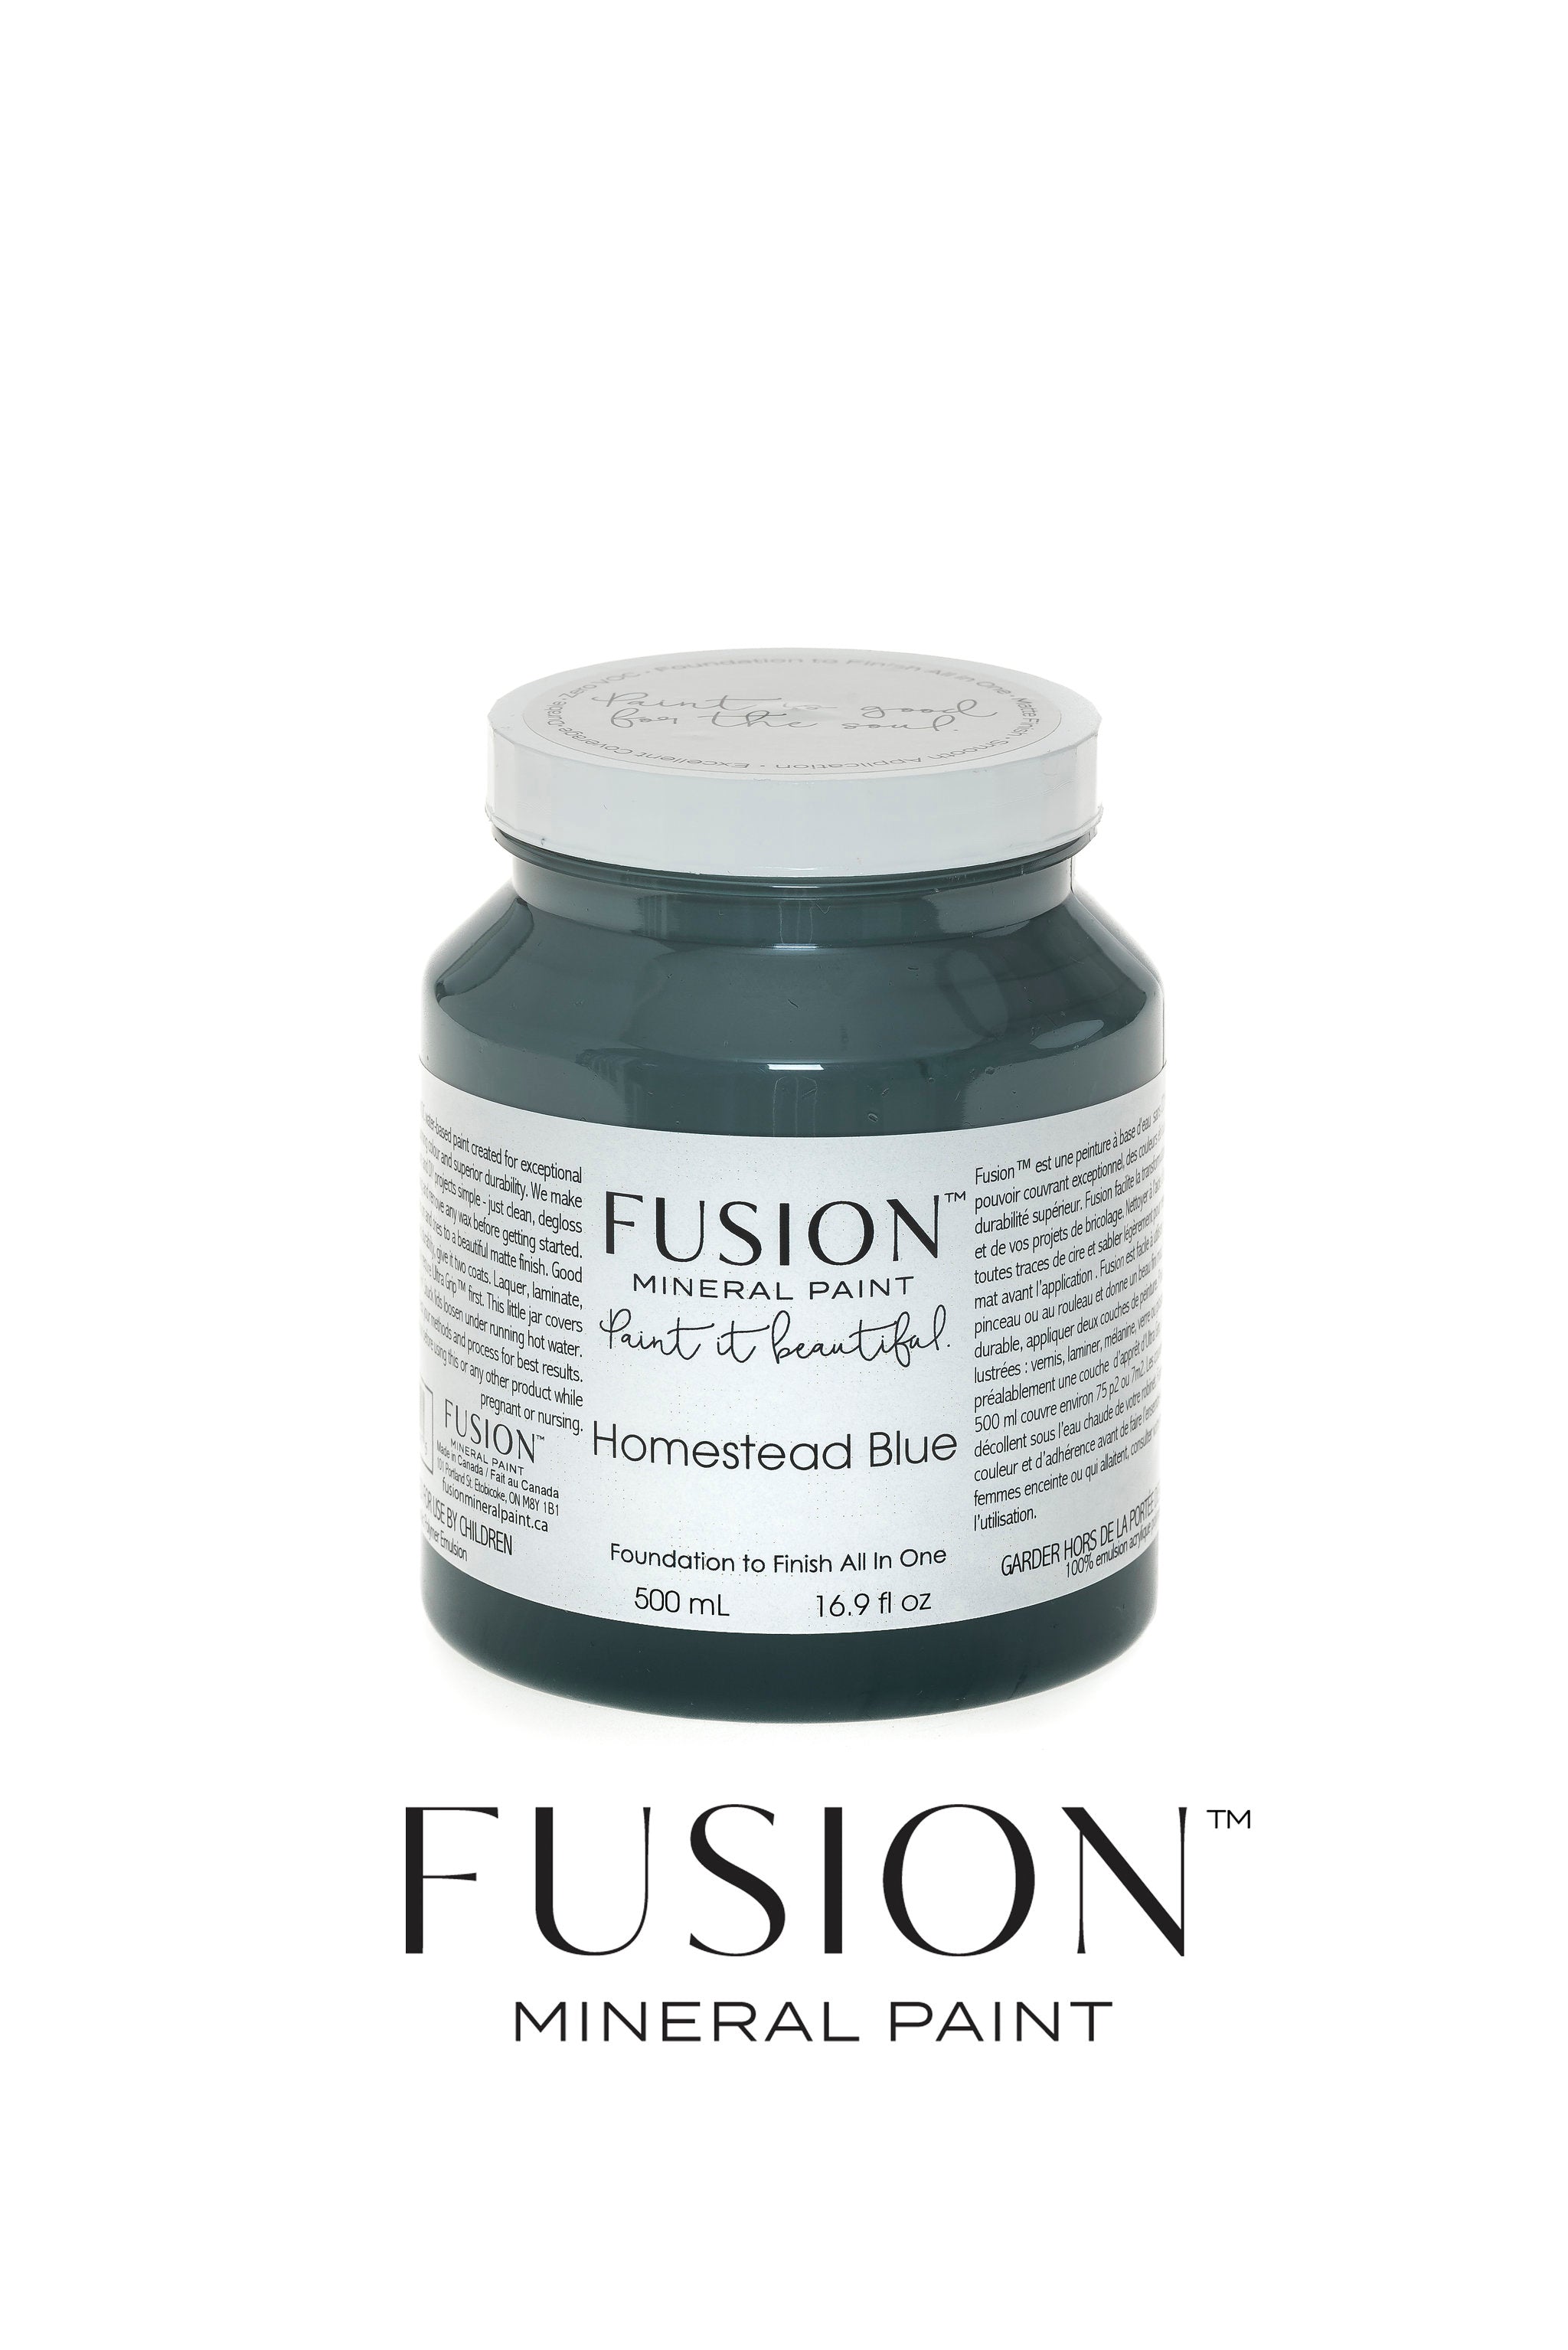 Fusion Mineral Paint Midnight Blue Pint